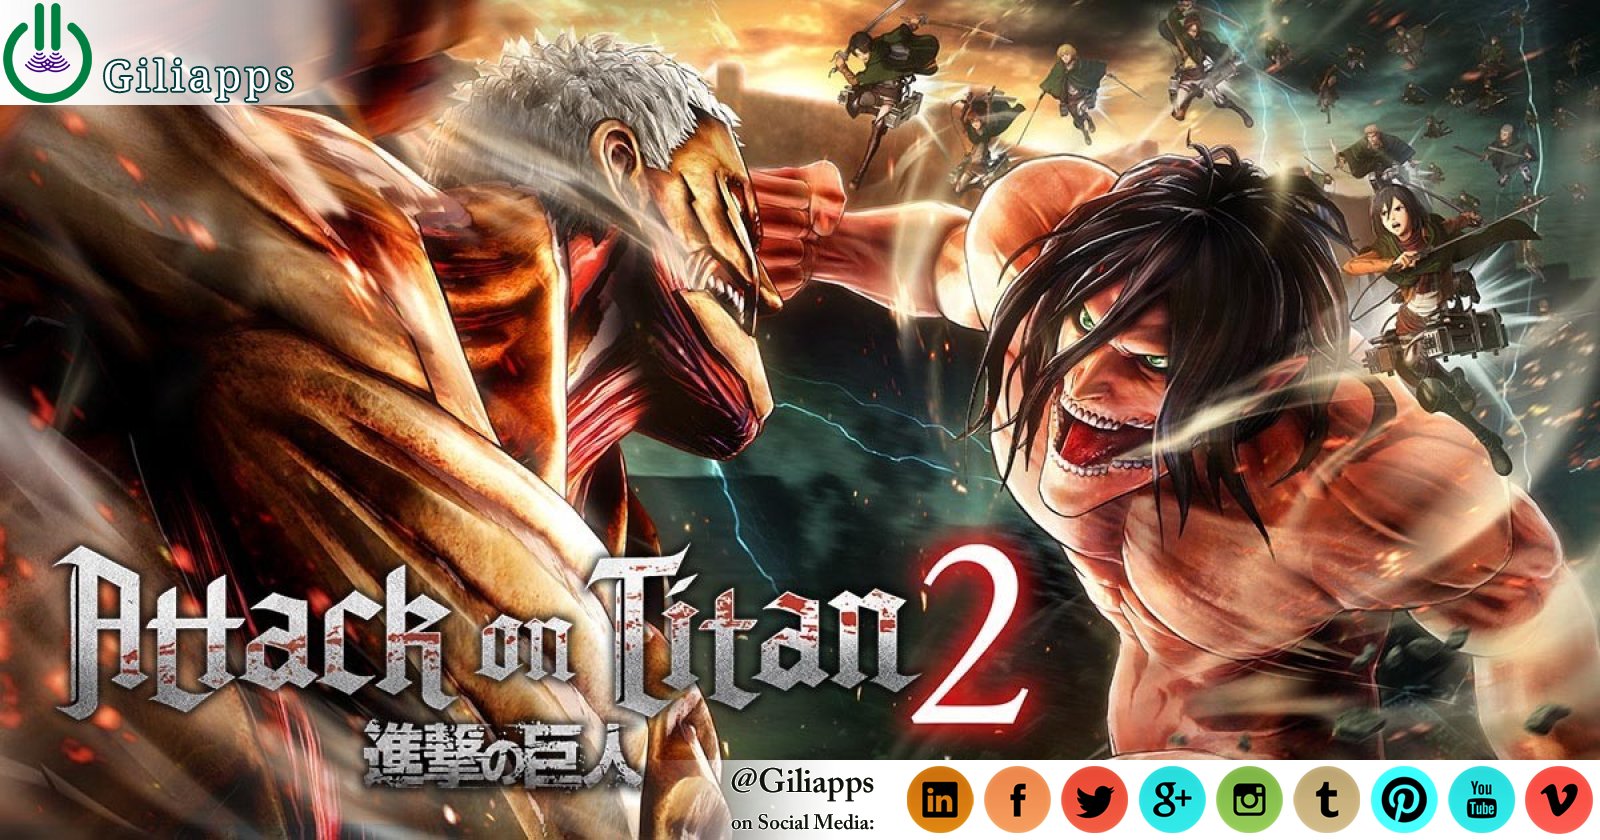  ATTACK ON TITAN 2 will release on 20 Mar 2018